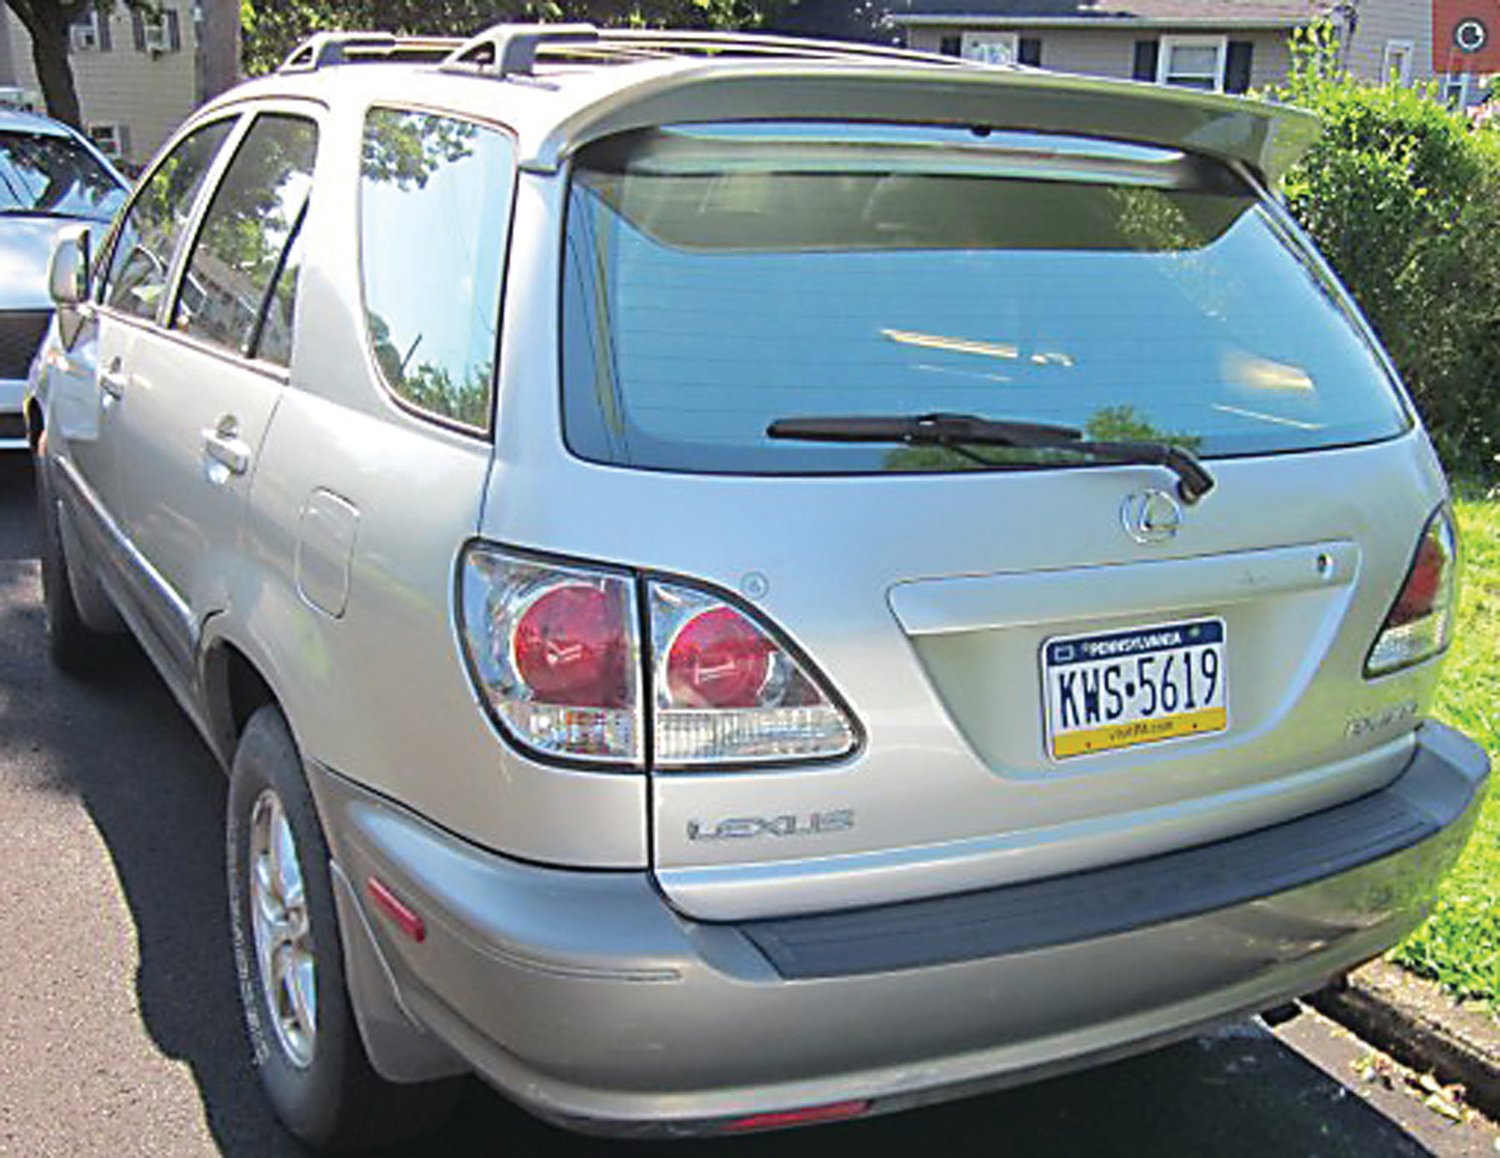 The back of Matthew James Branning’s car, with the license plate showing.